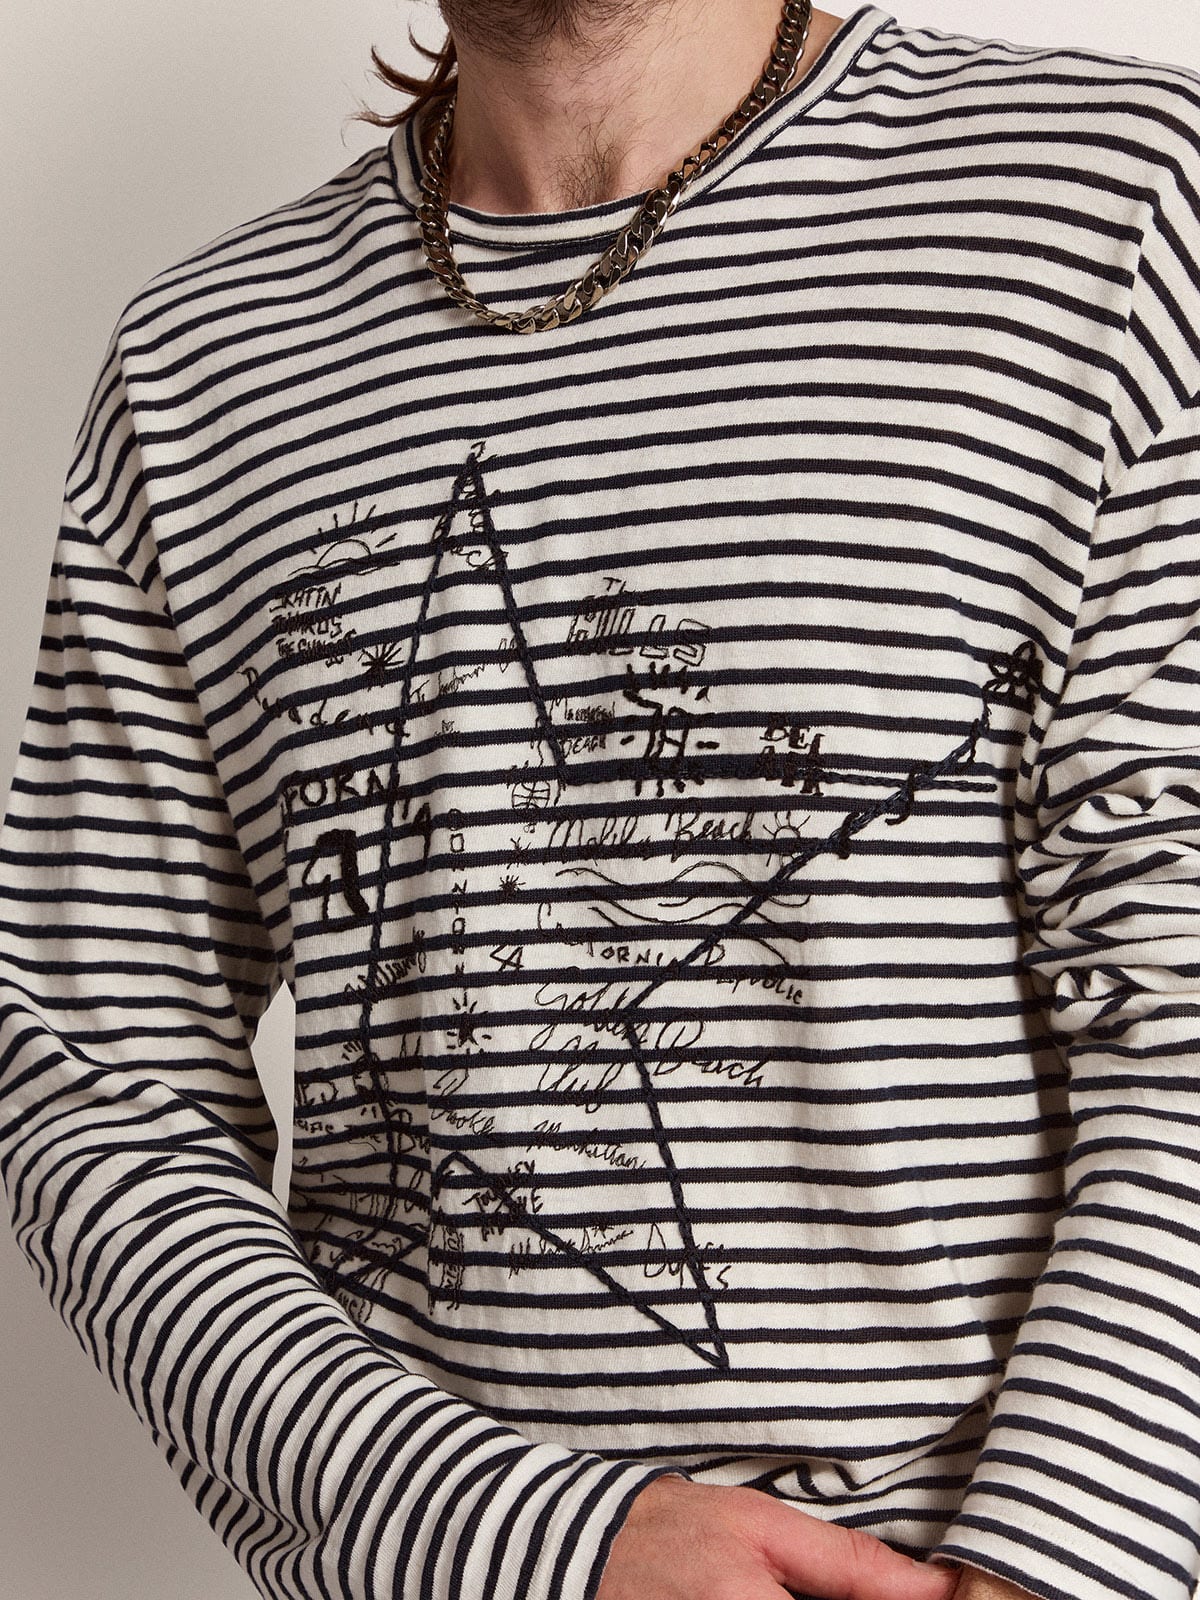 Golden Goose - Golden Collection T-shirt with white and blue stripes and embroidery on the front in 